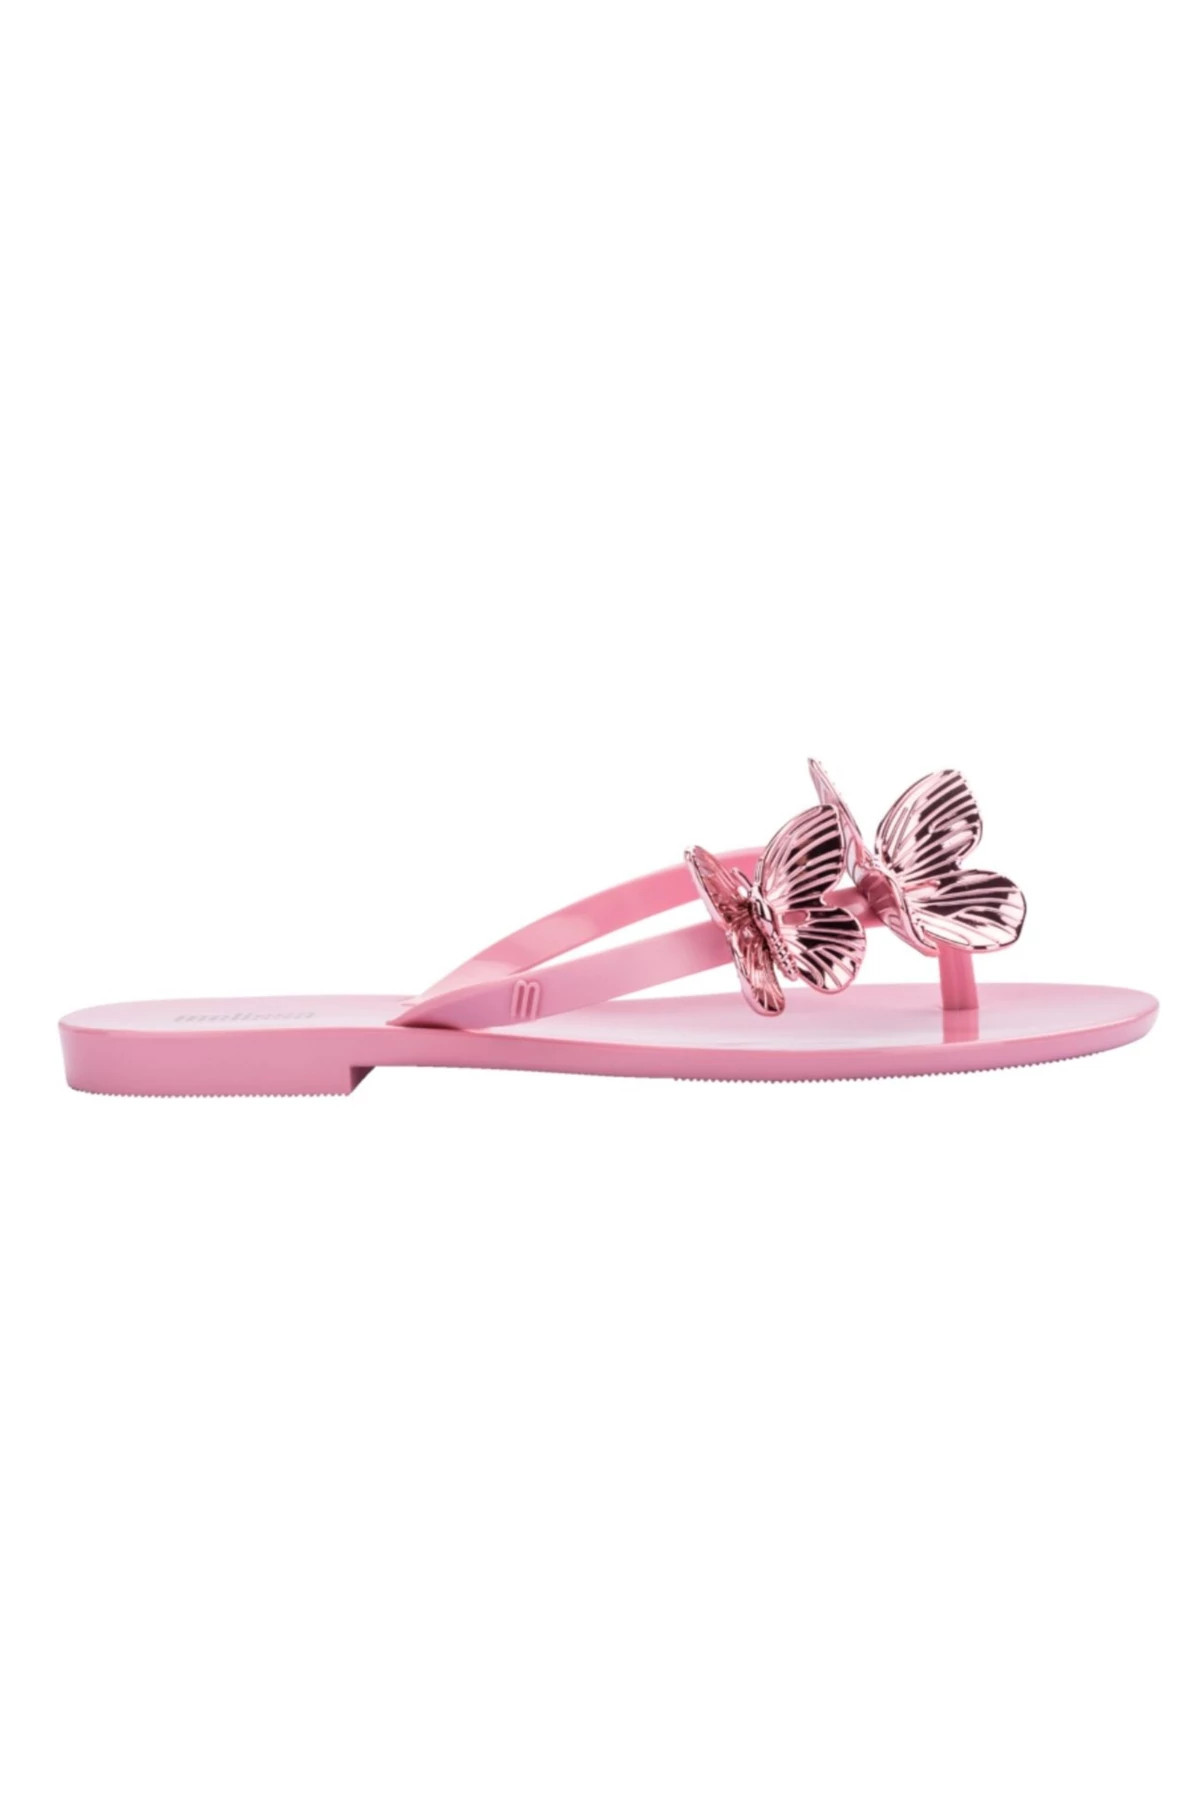 PINK Harmonic Butterfly Flip Flops image number 3